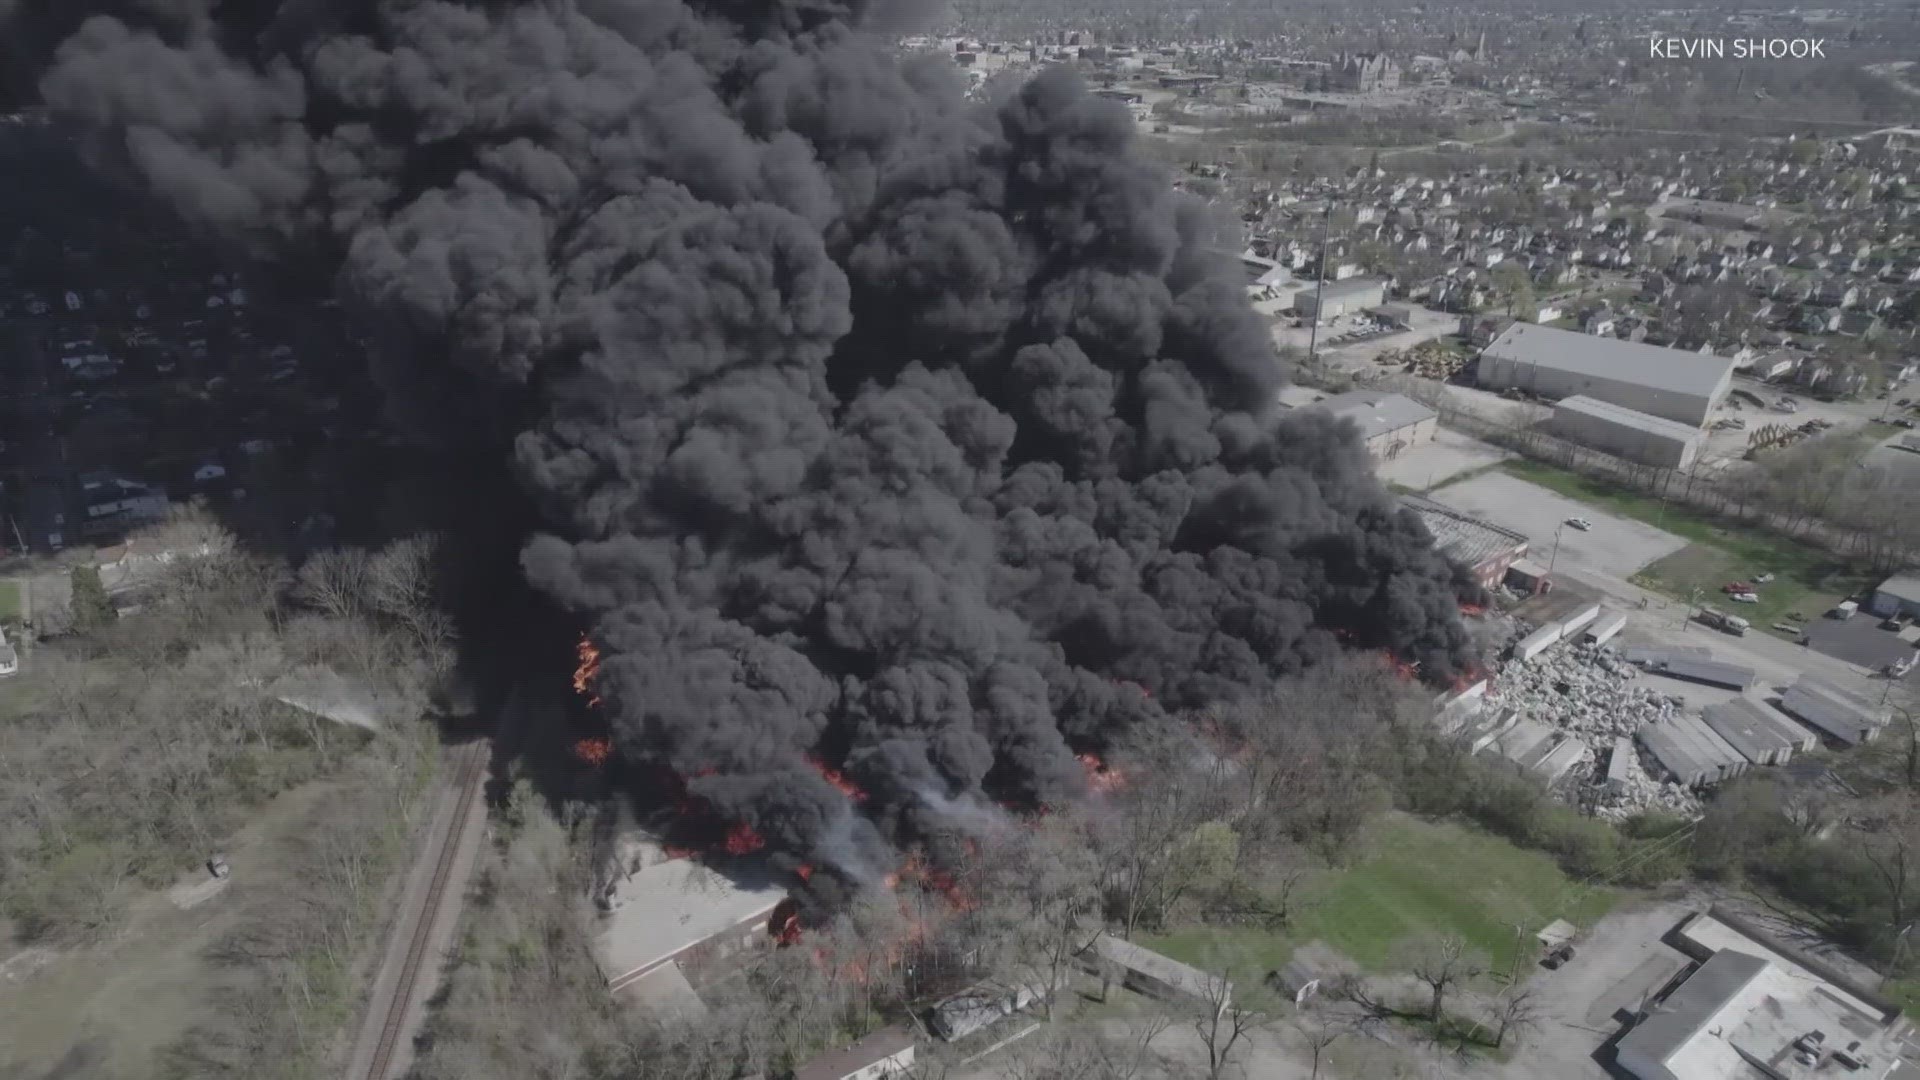 The massive fire destroyed a plastics recycling plant and sent toxic fumes into the air for days.